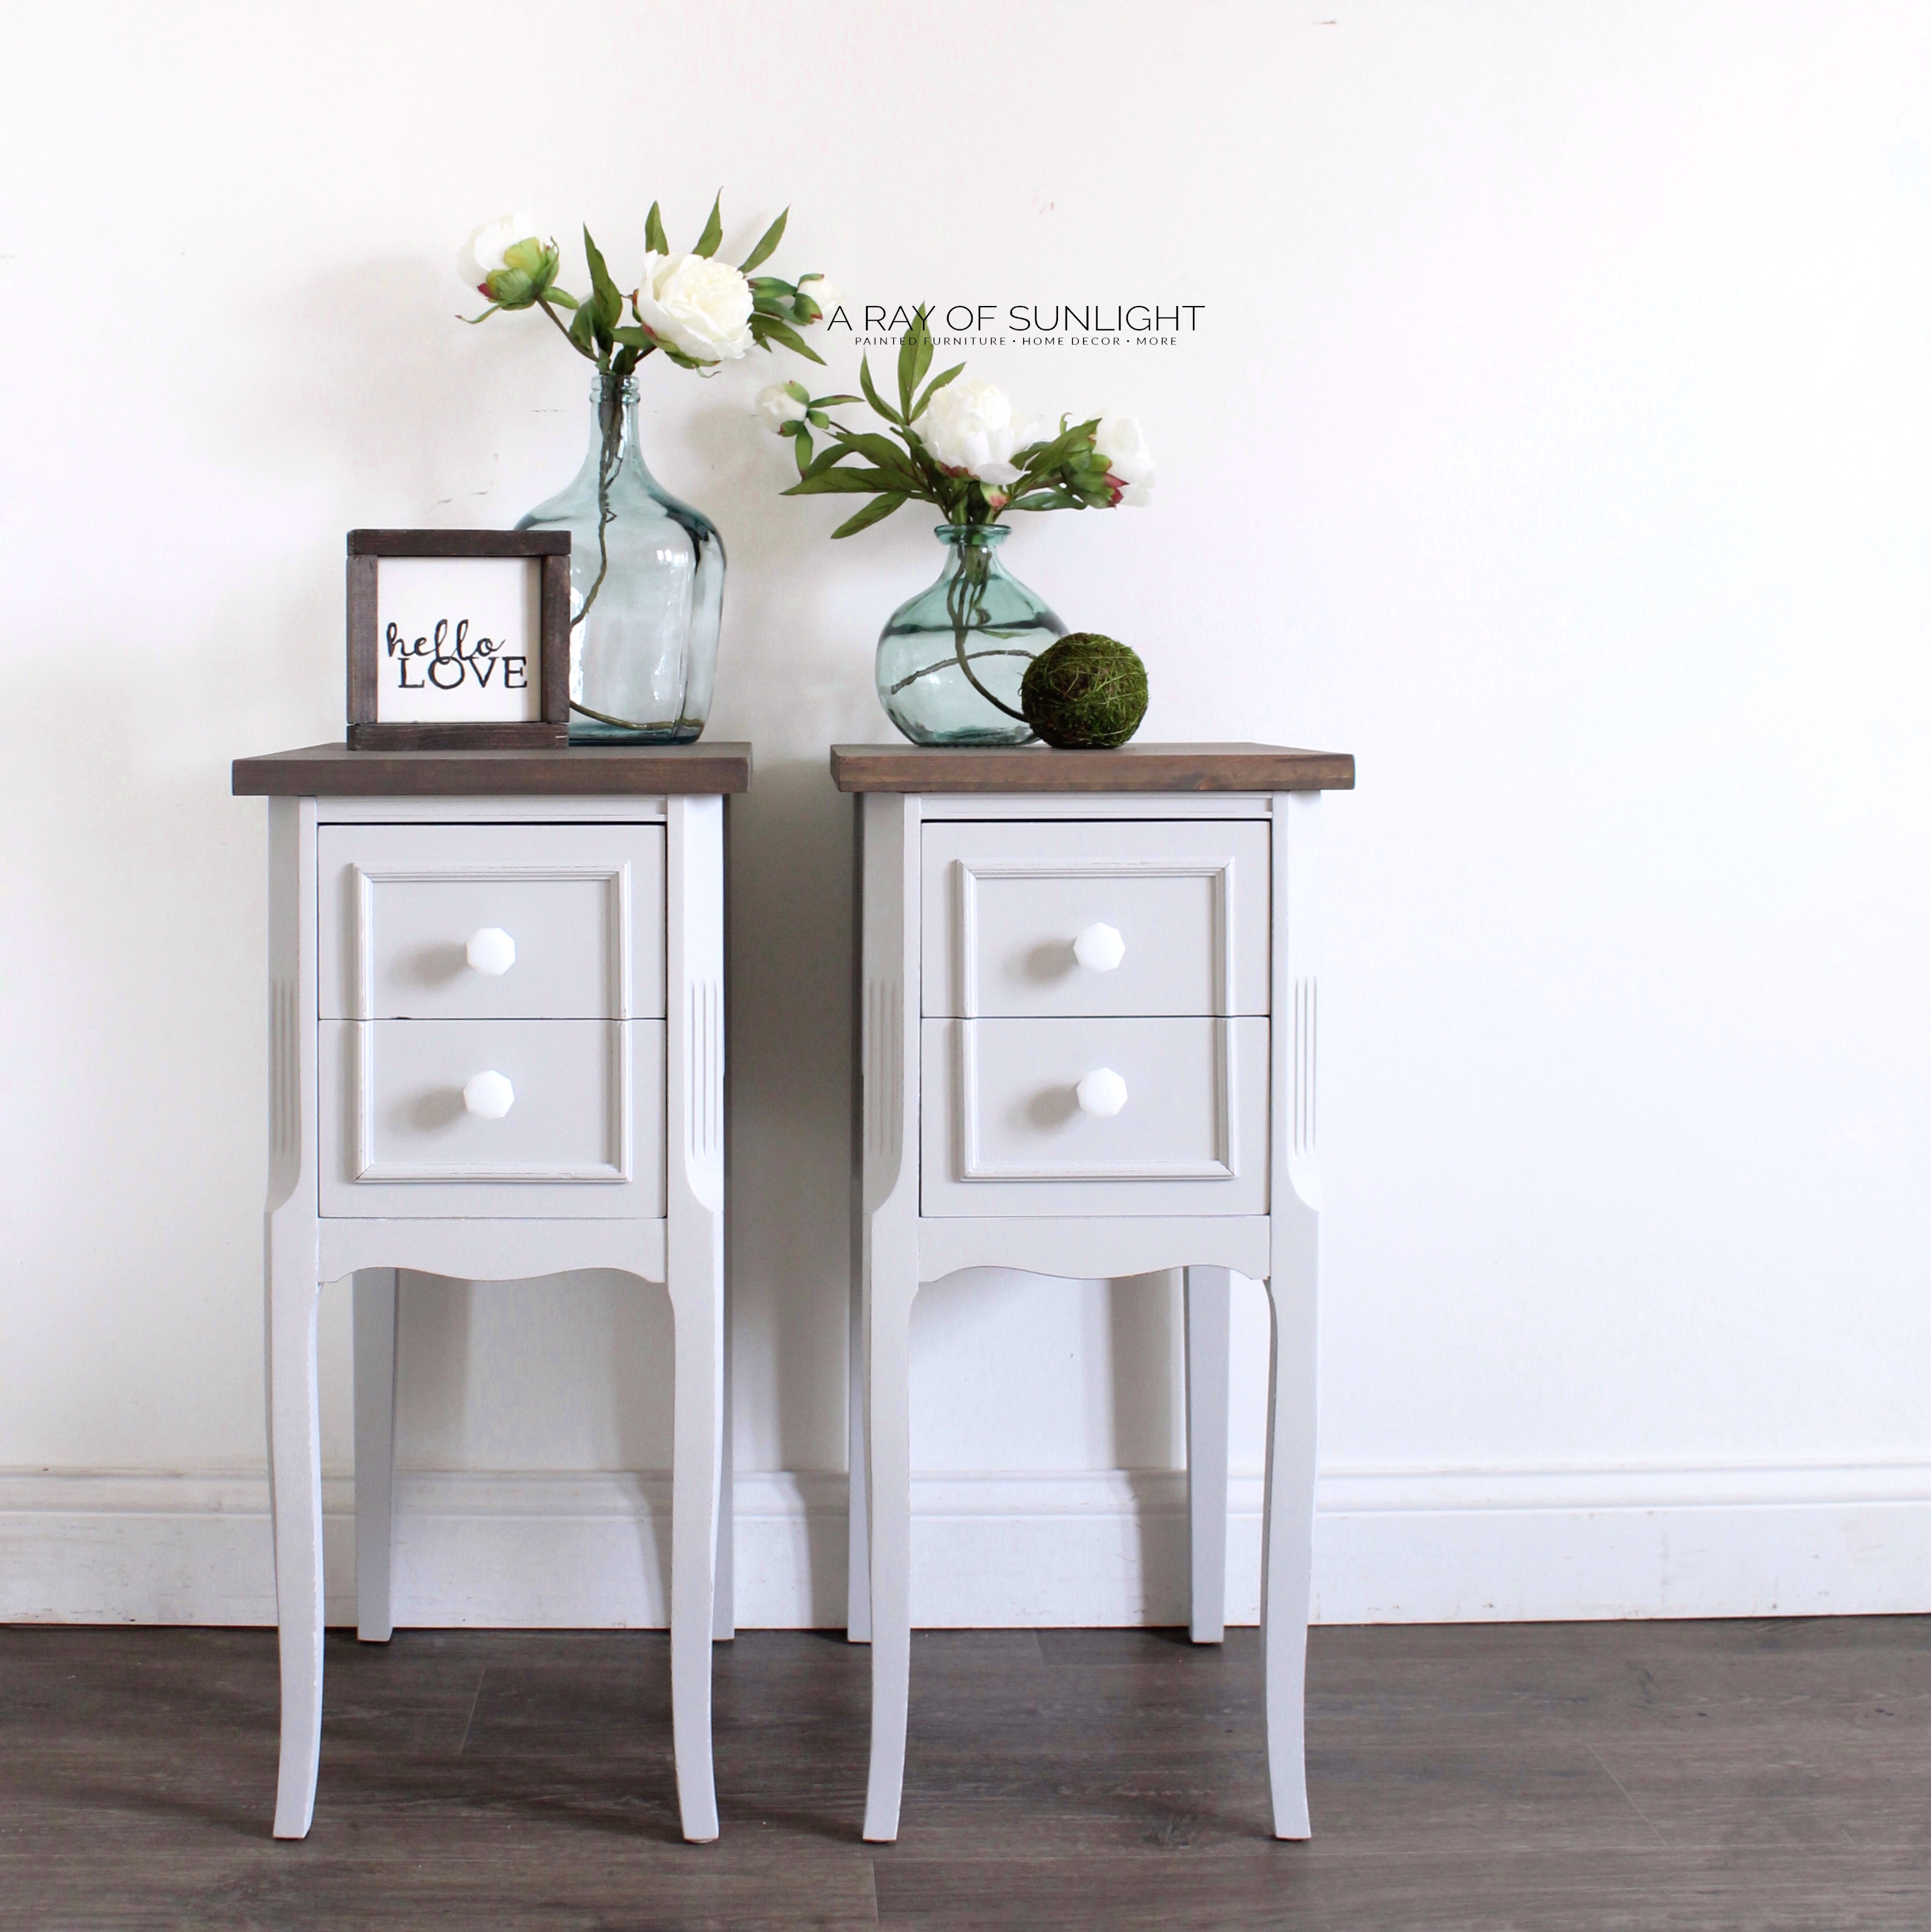 free shipping light gray farmhouse end tables ray sunlight rustic nightstands with white milk glass knobs and dark wood tops bedroom drop leaf dining table grey round twin